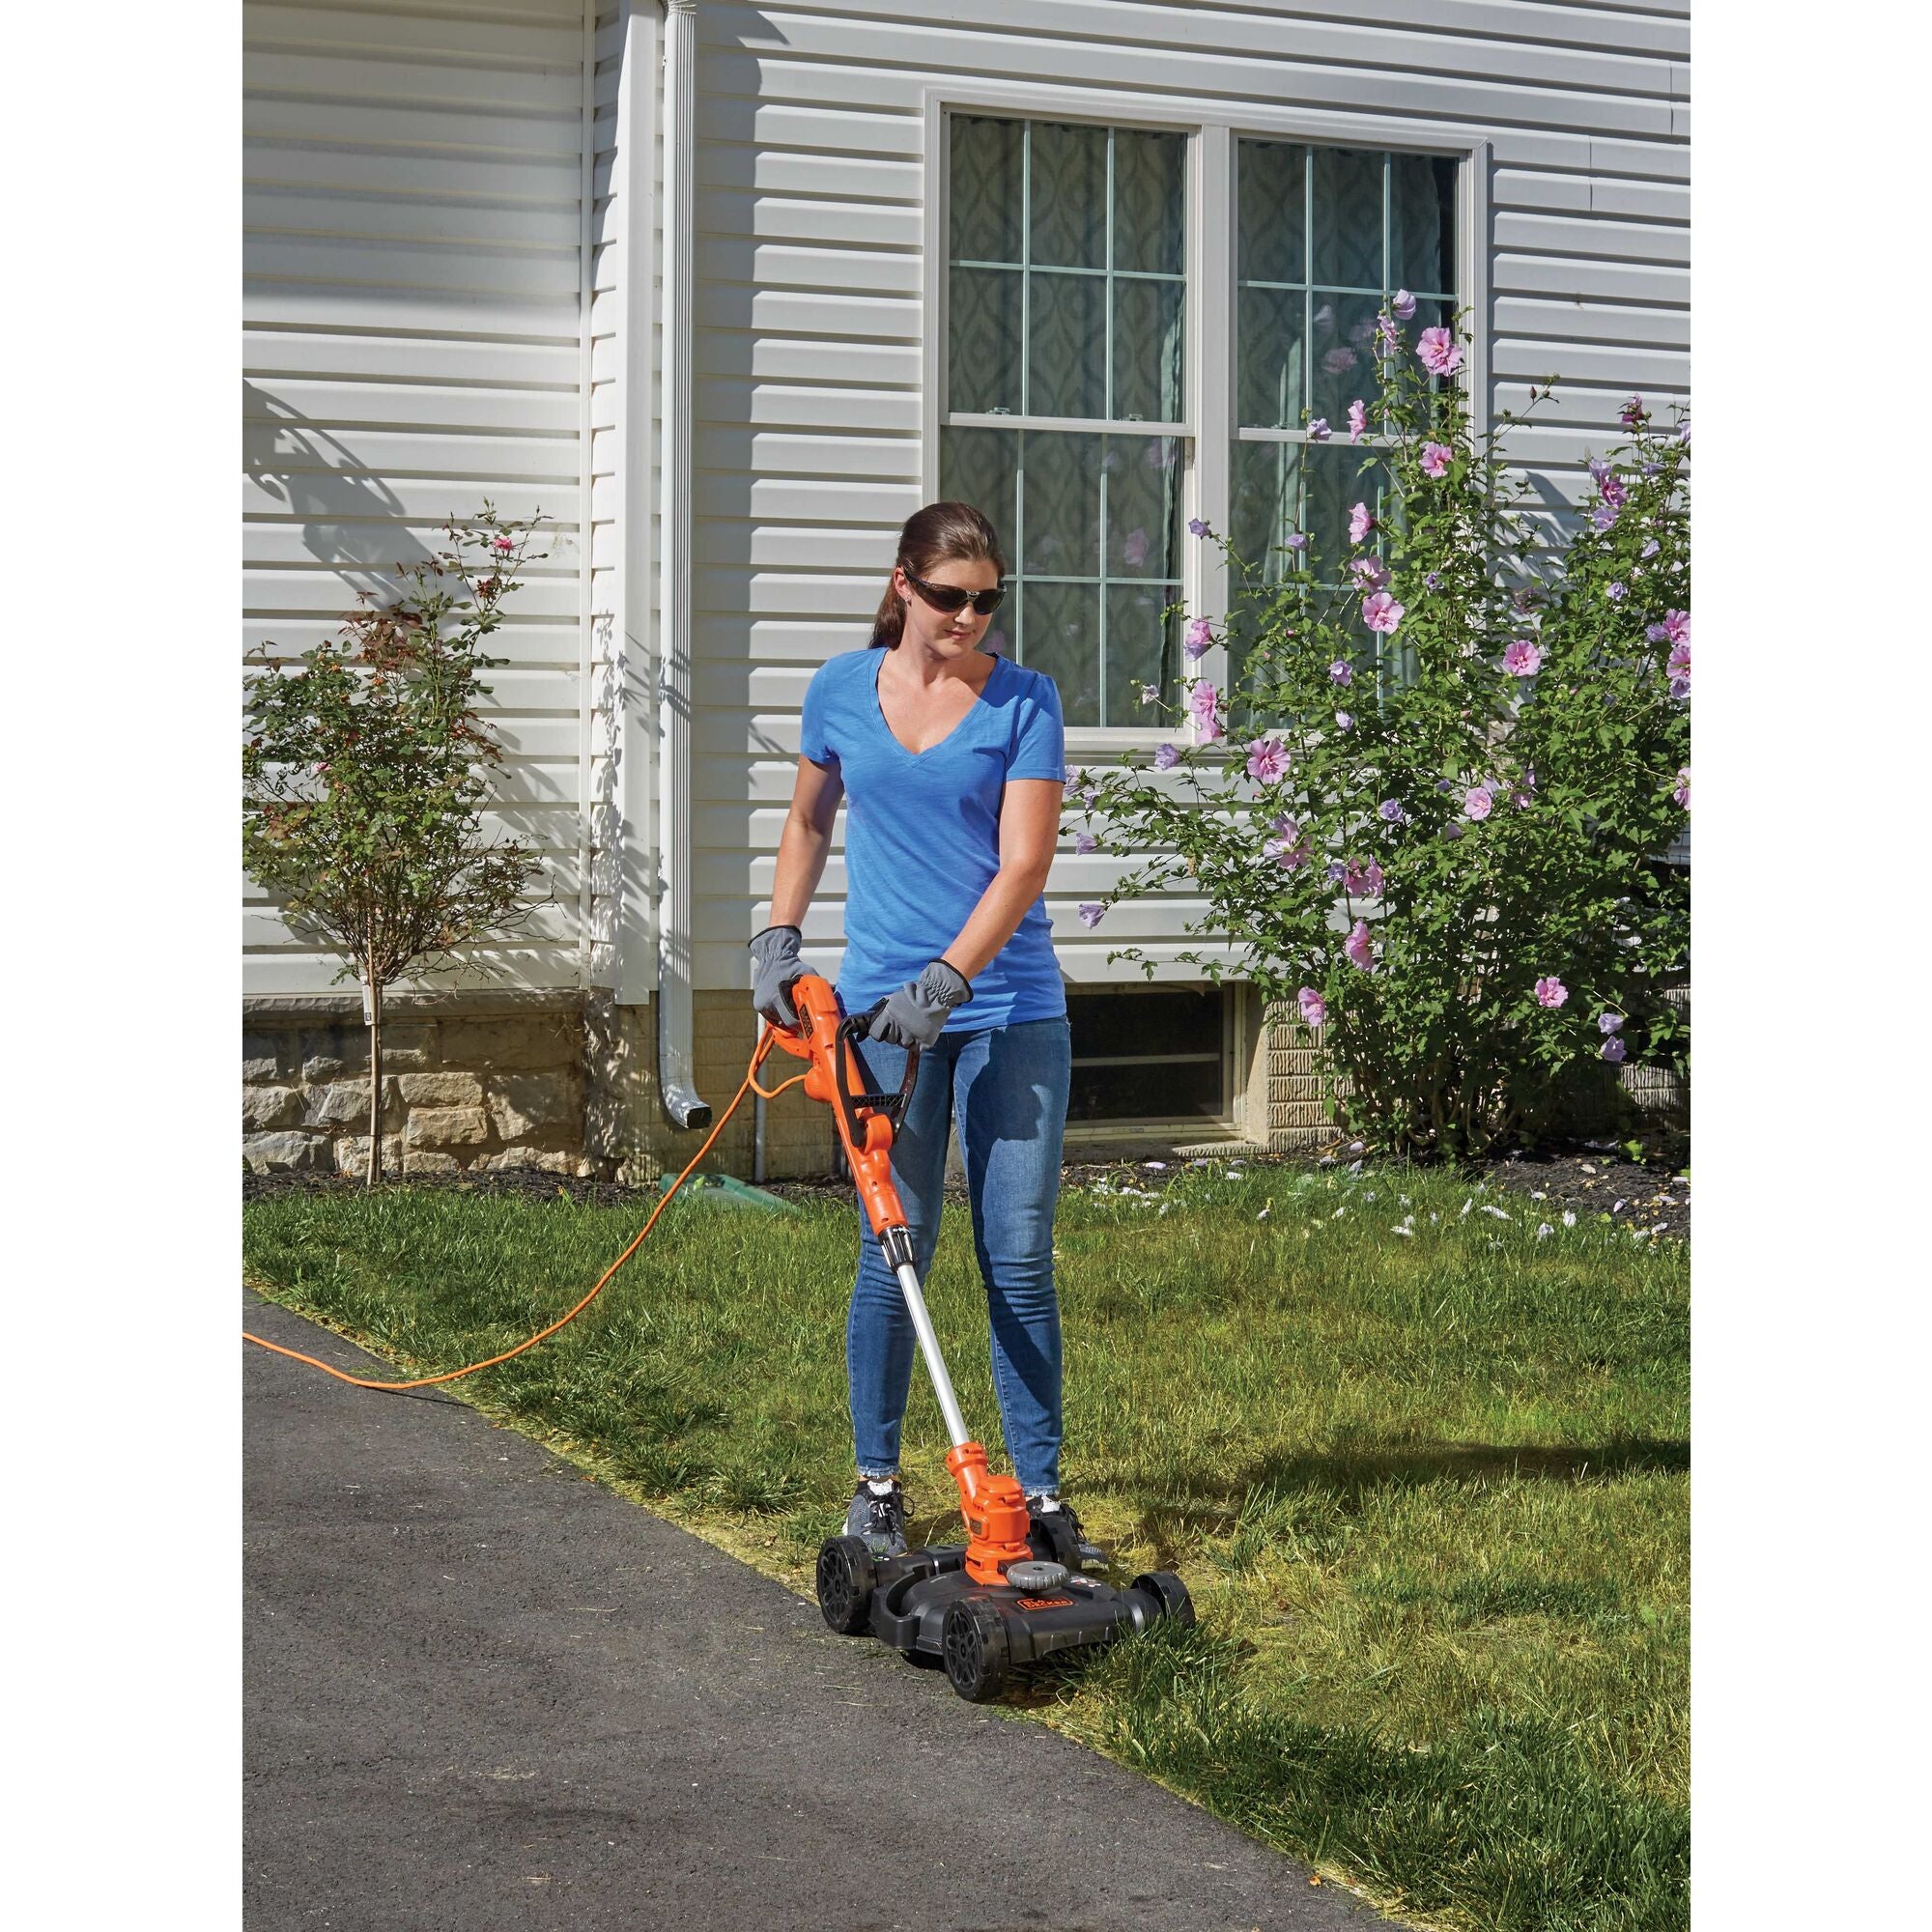 BLACK+DECKER 12 in. 6.5 AMP Corded Electric 3-in-1 String Trimmer & Lawn  Edger with Lawn Mower Attachment MTE912 - The Home Depot